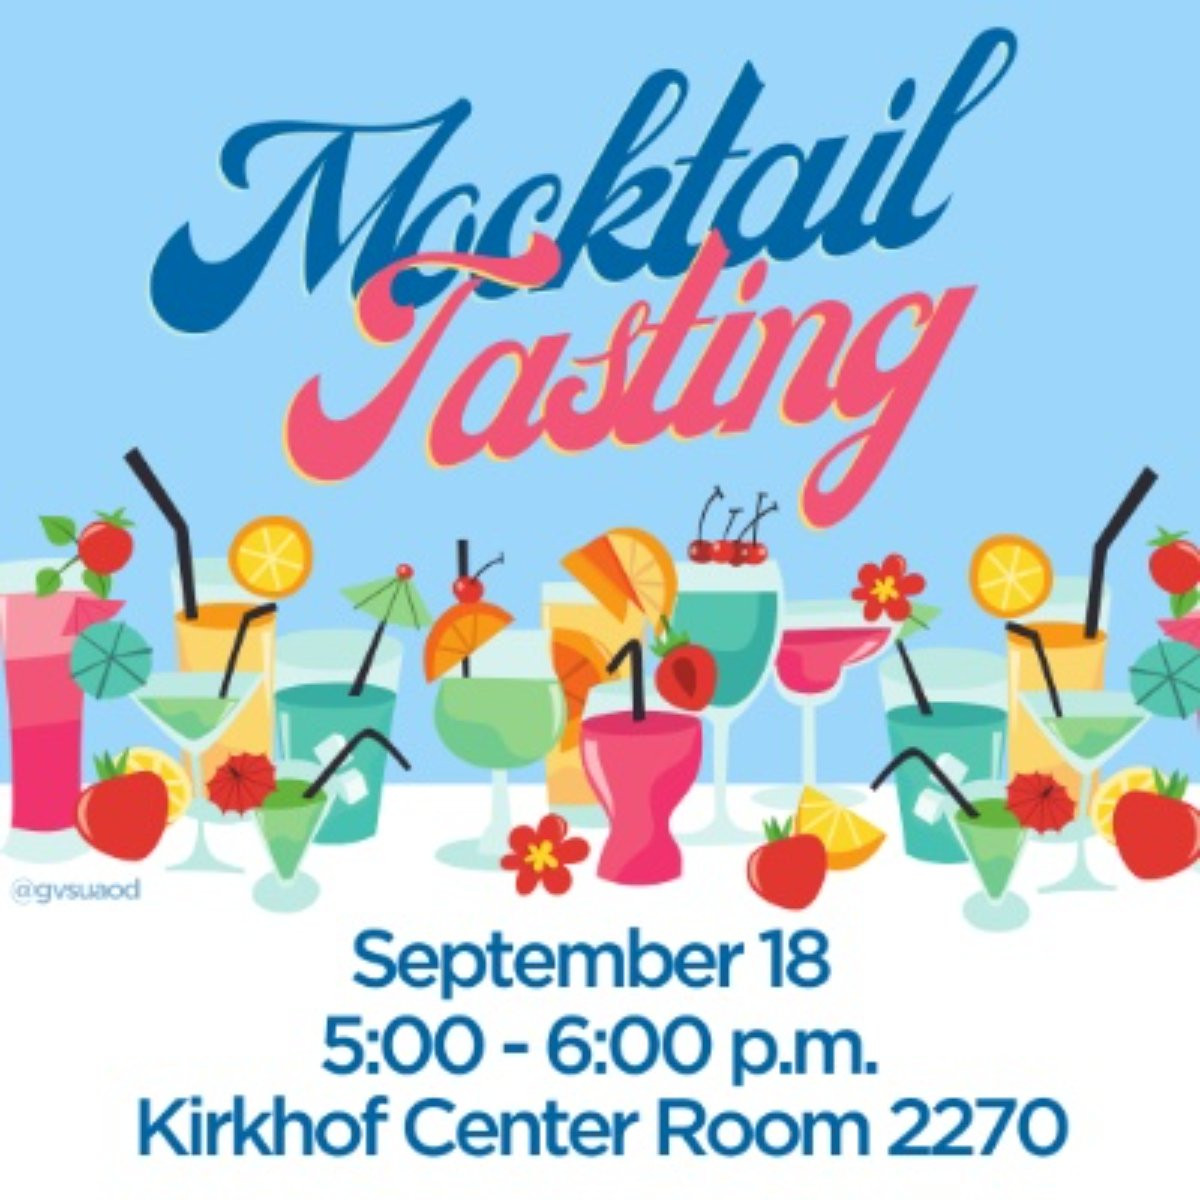 A graphic with mocktails and details on where the mocktail tasting is going to be on september 18 5-6p.m. in Kirkhof Center Room 2270